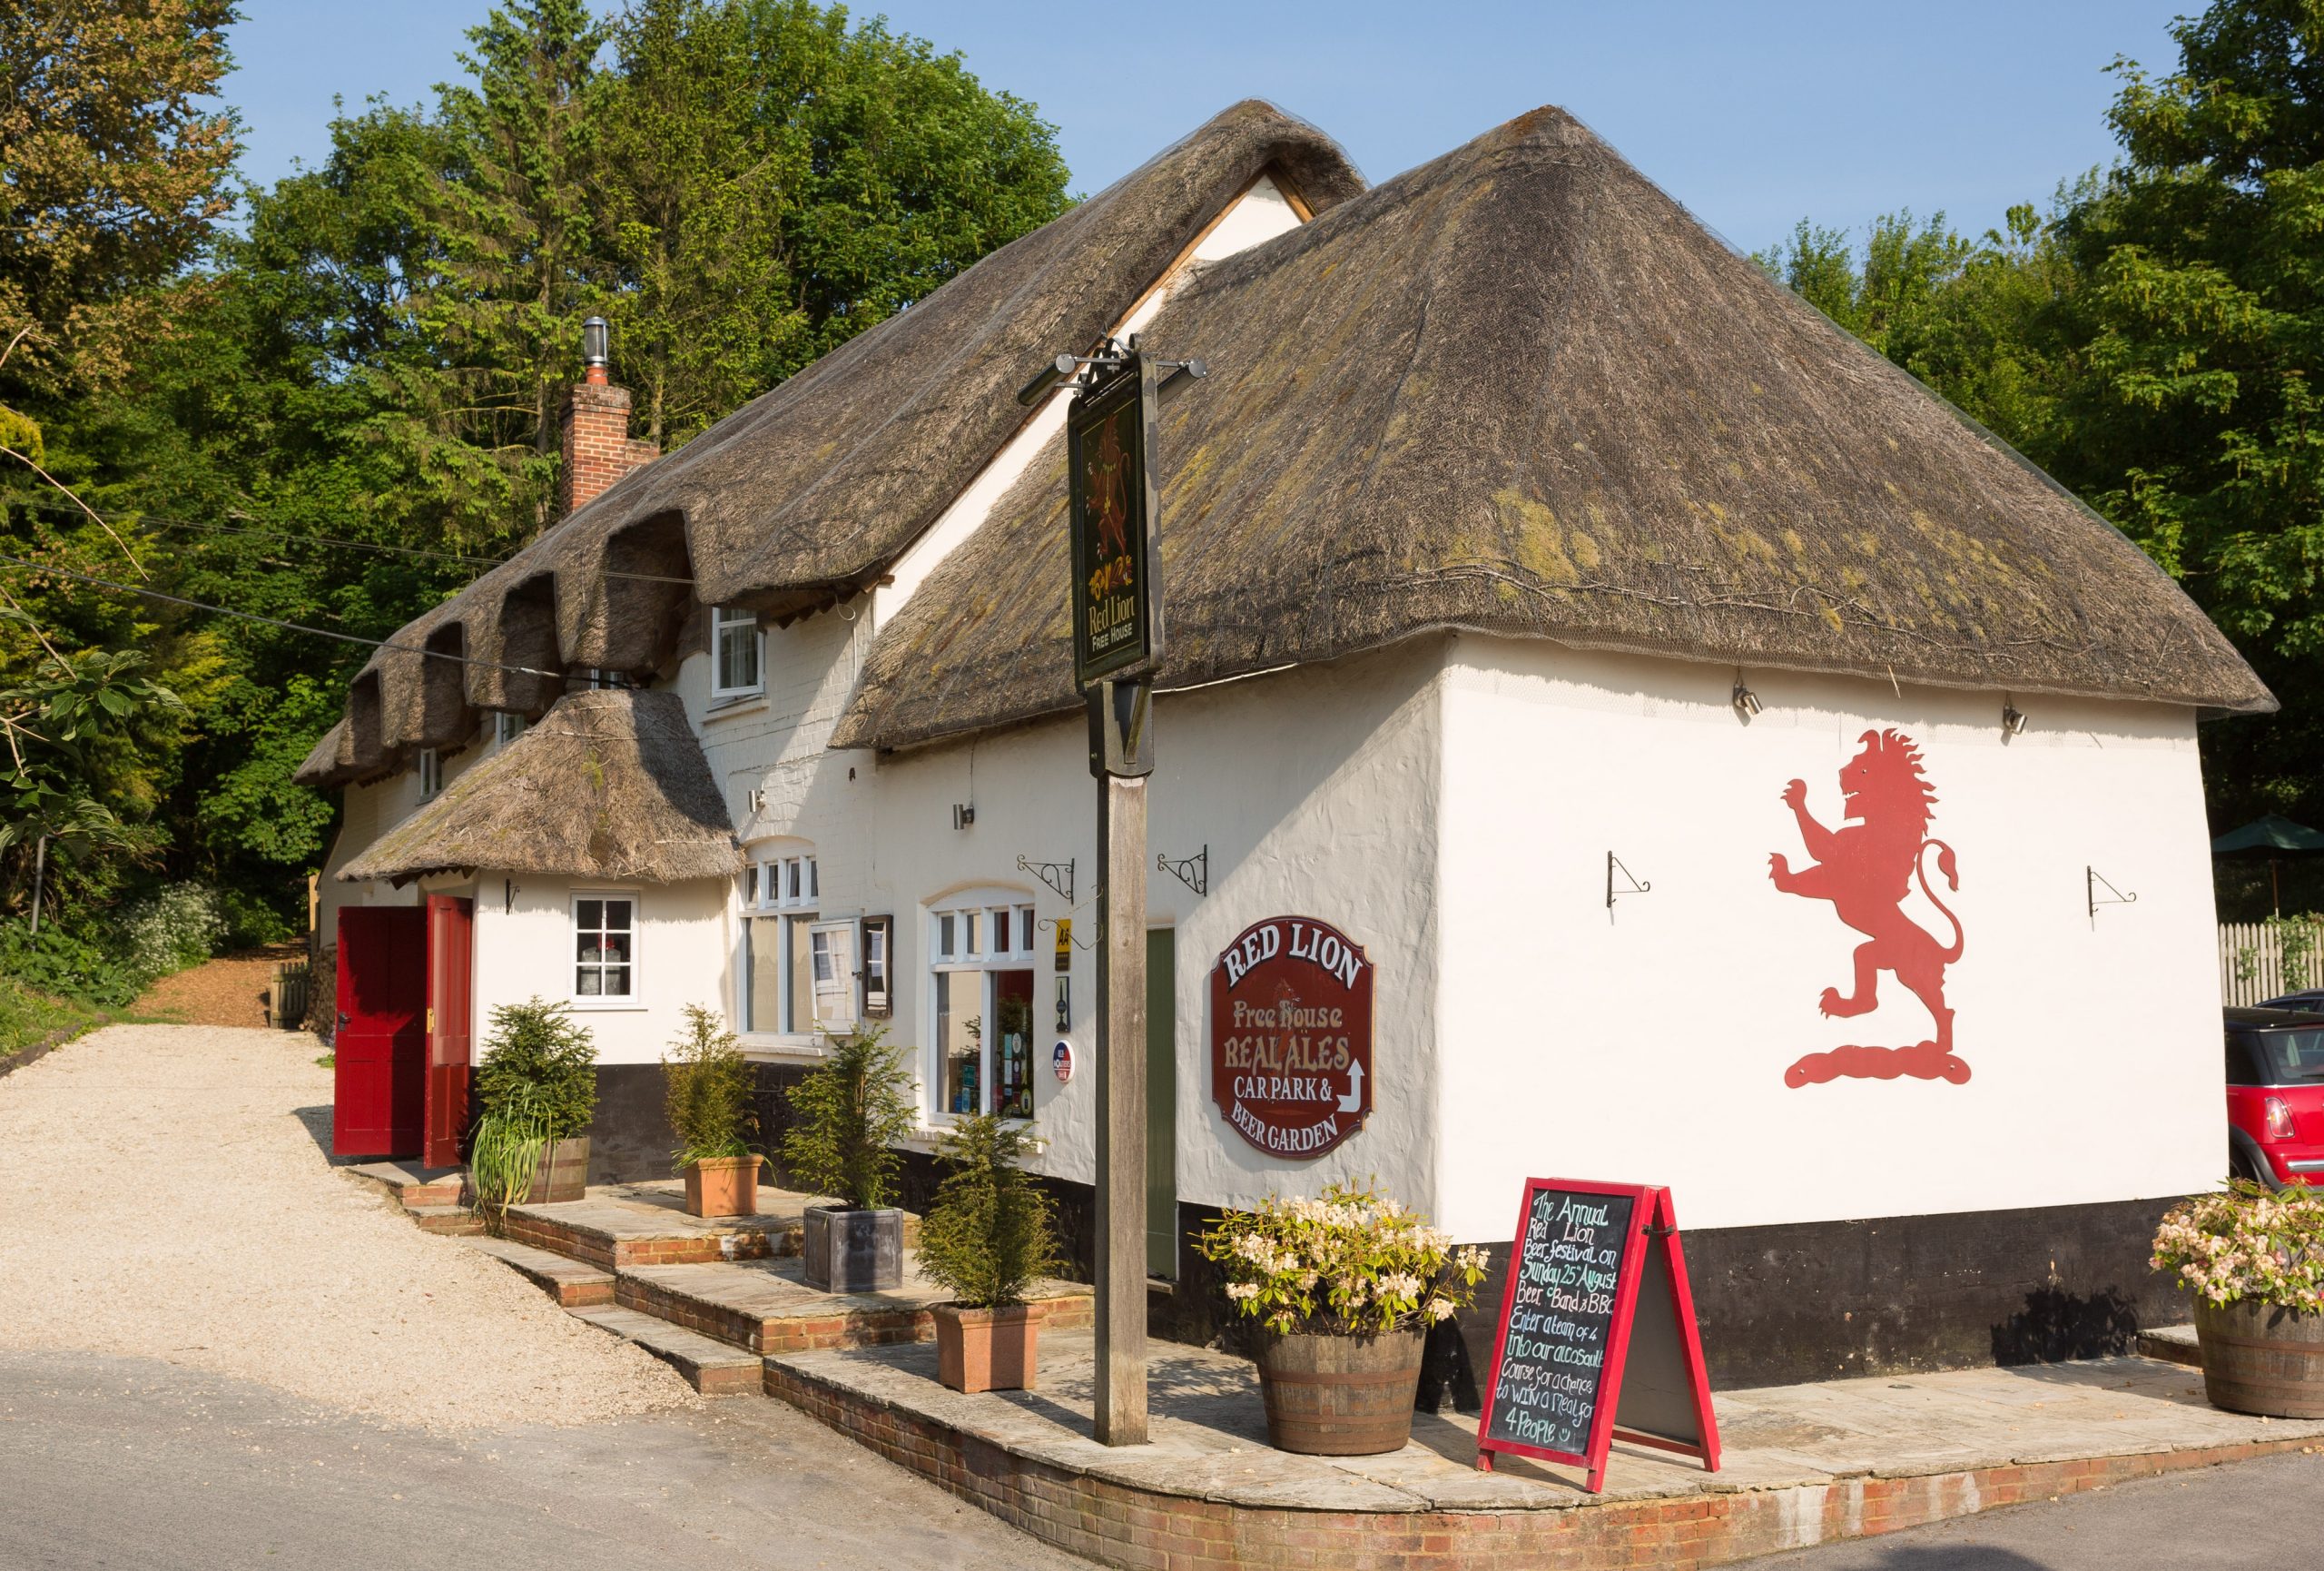 Restaurant with rooms in a thached village pub